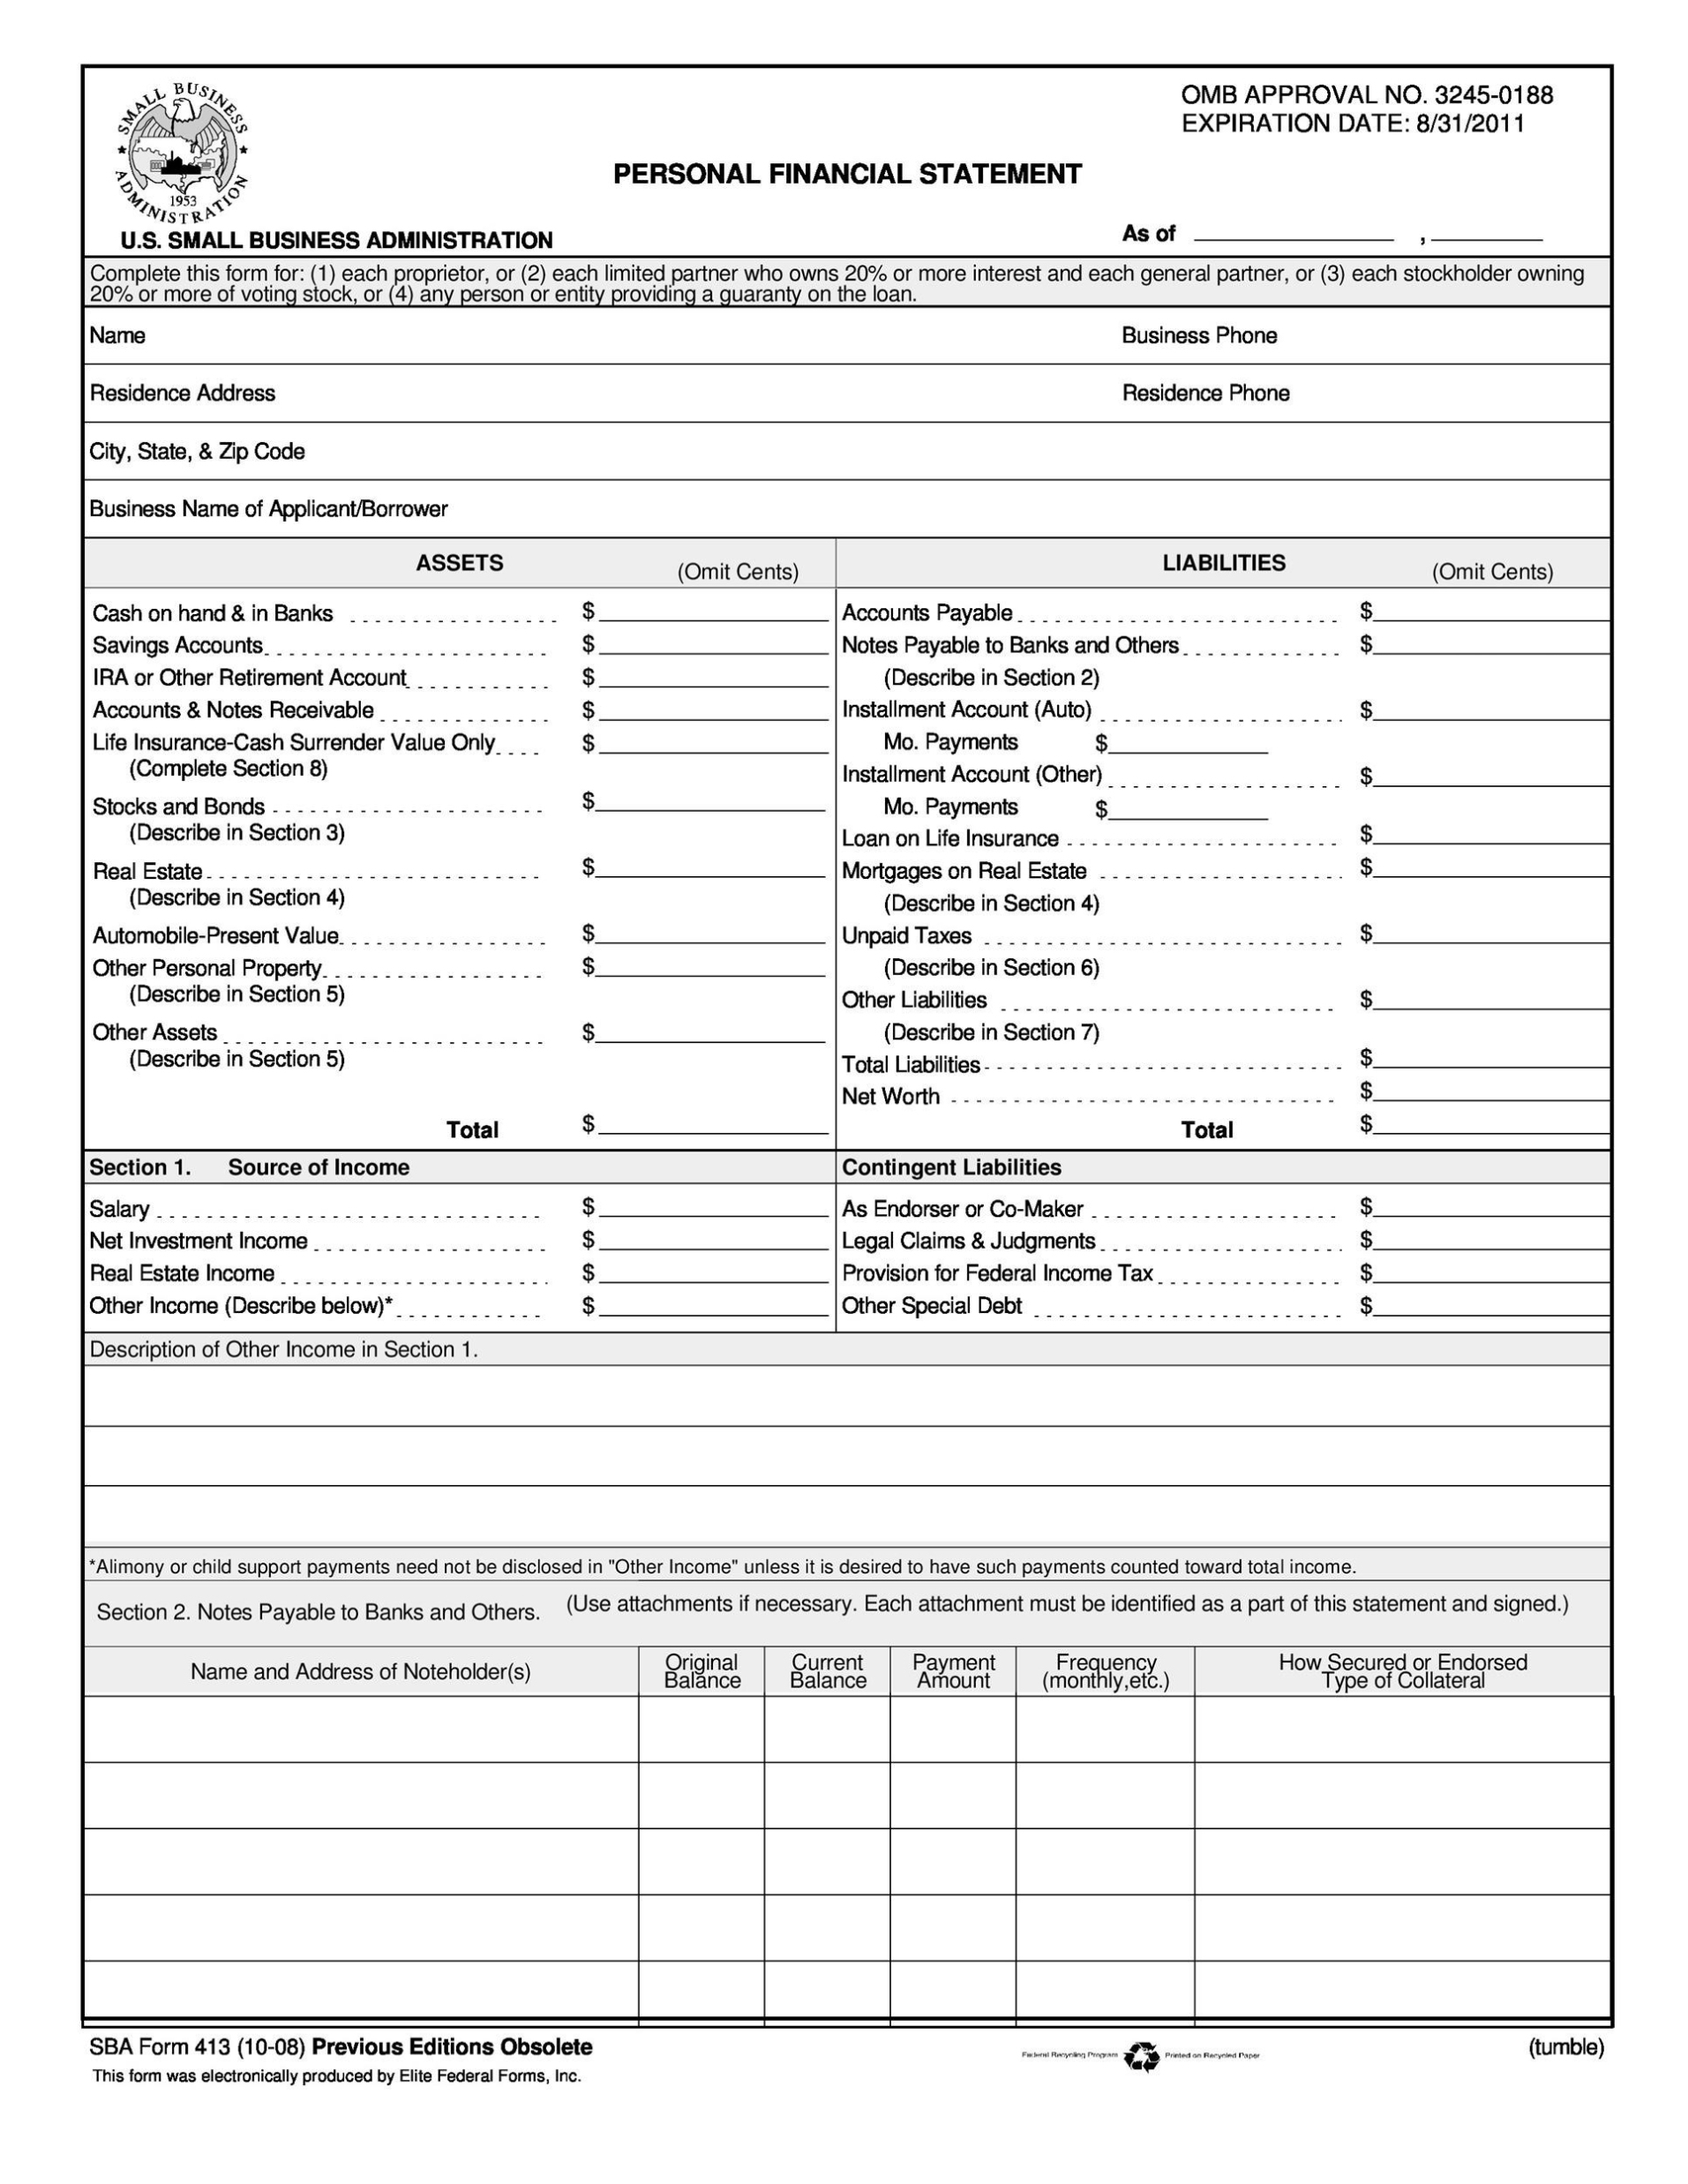 Small Business Financial Statement Template For Your Needs intended for Financial Statement For Small Business Template